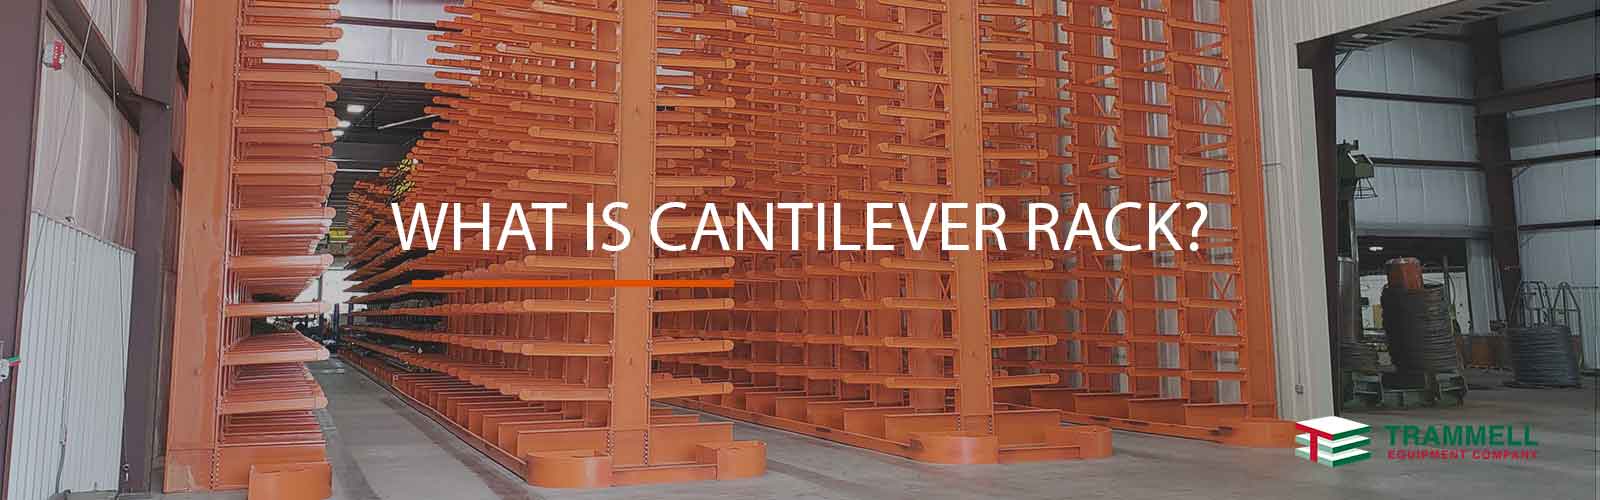 What is Cantilever Rack